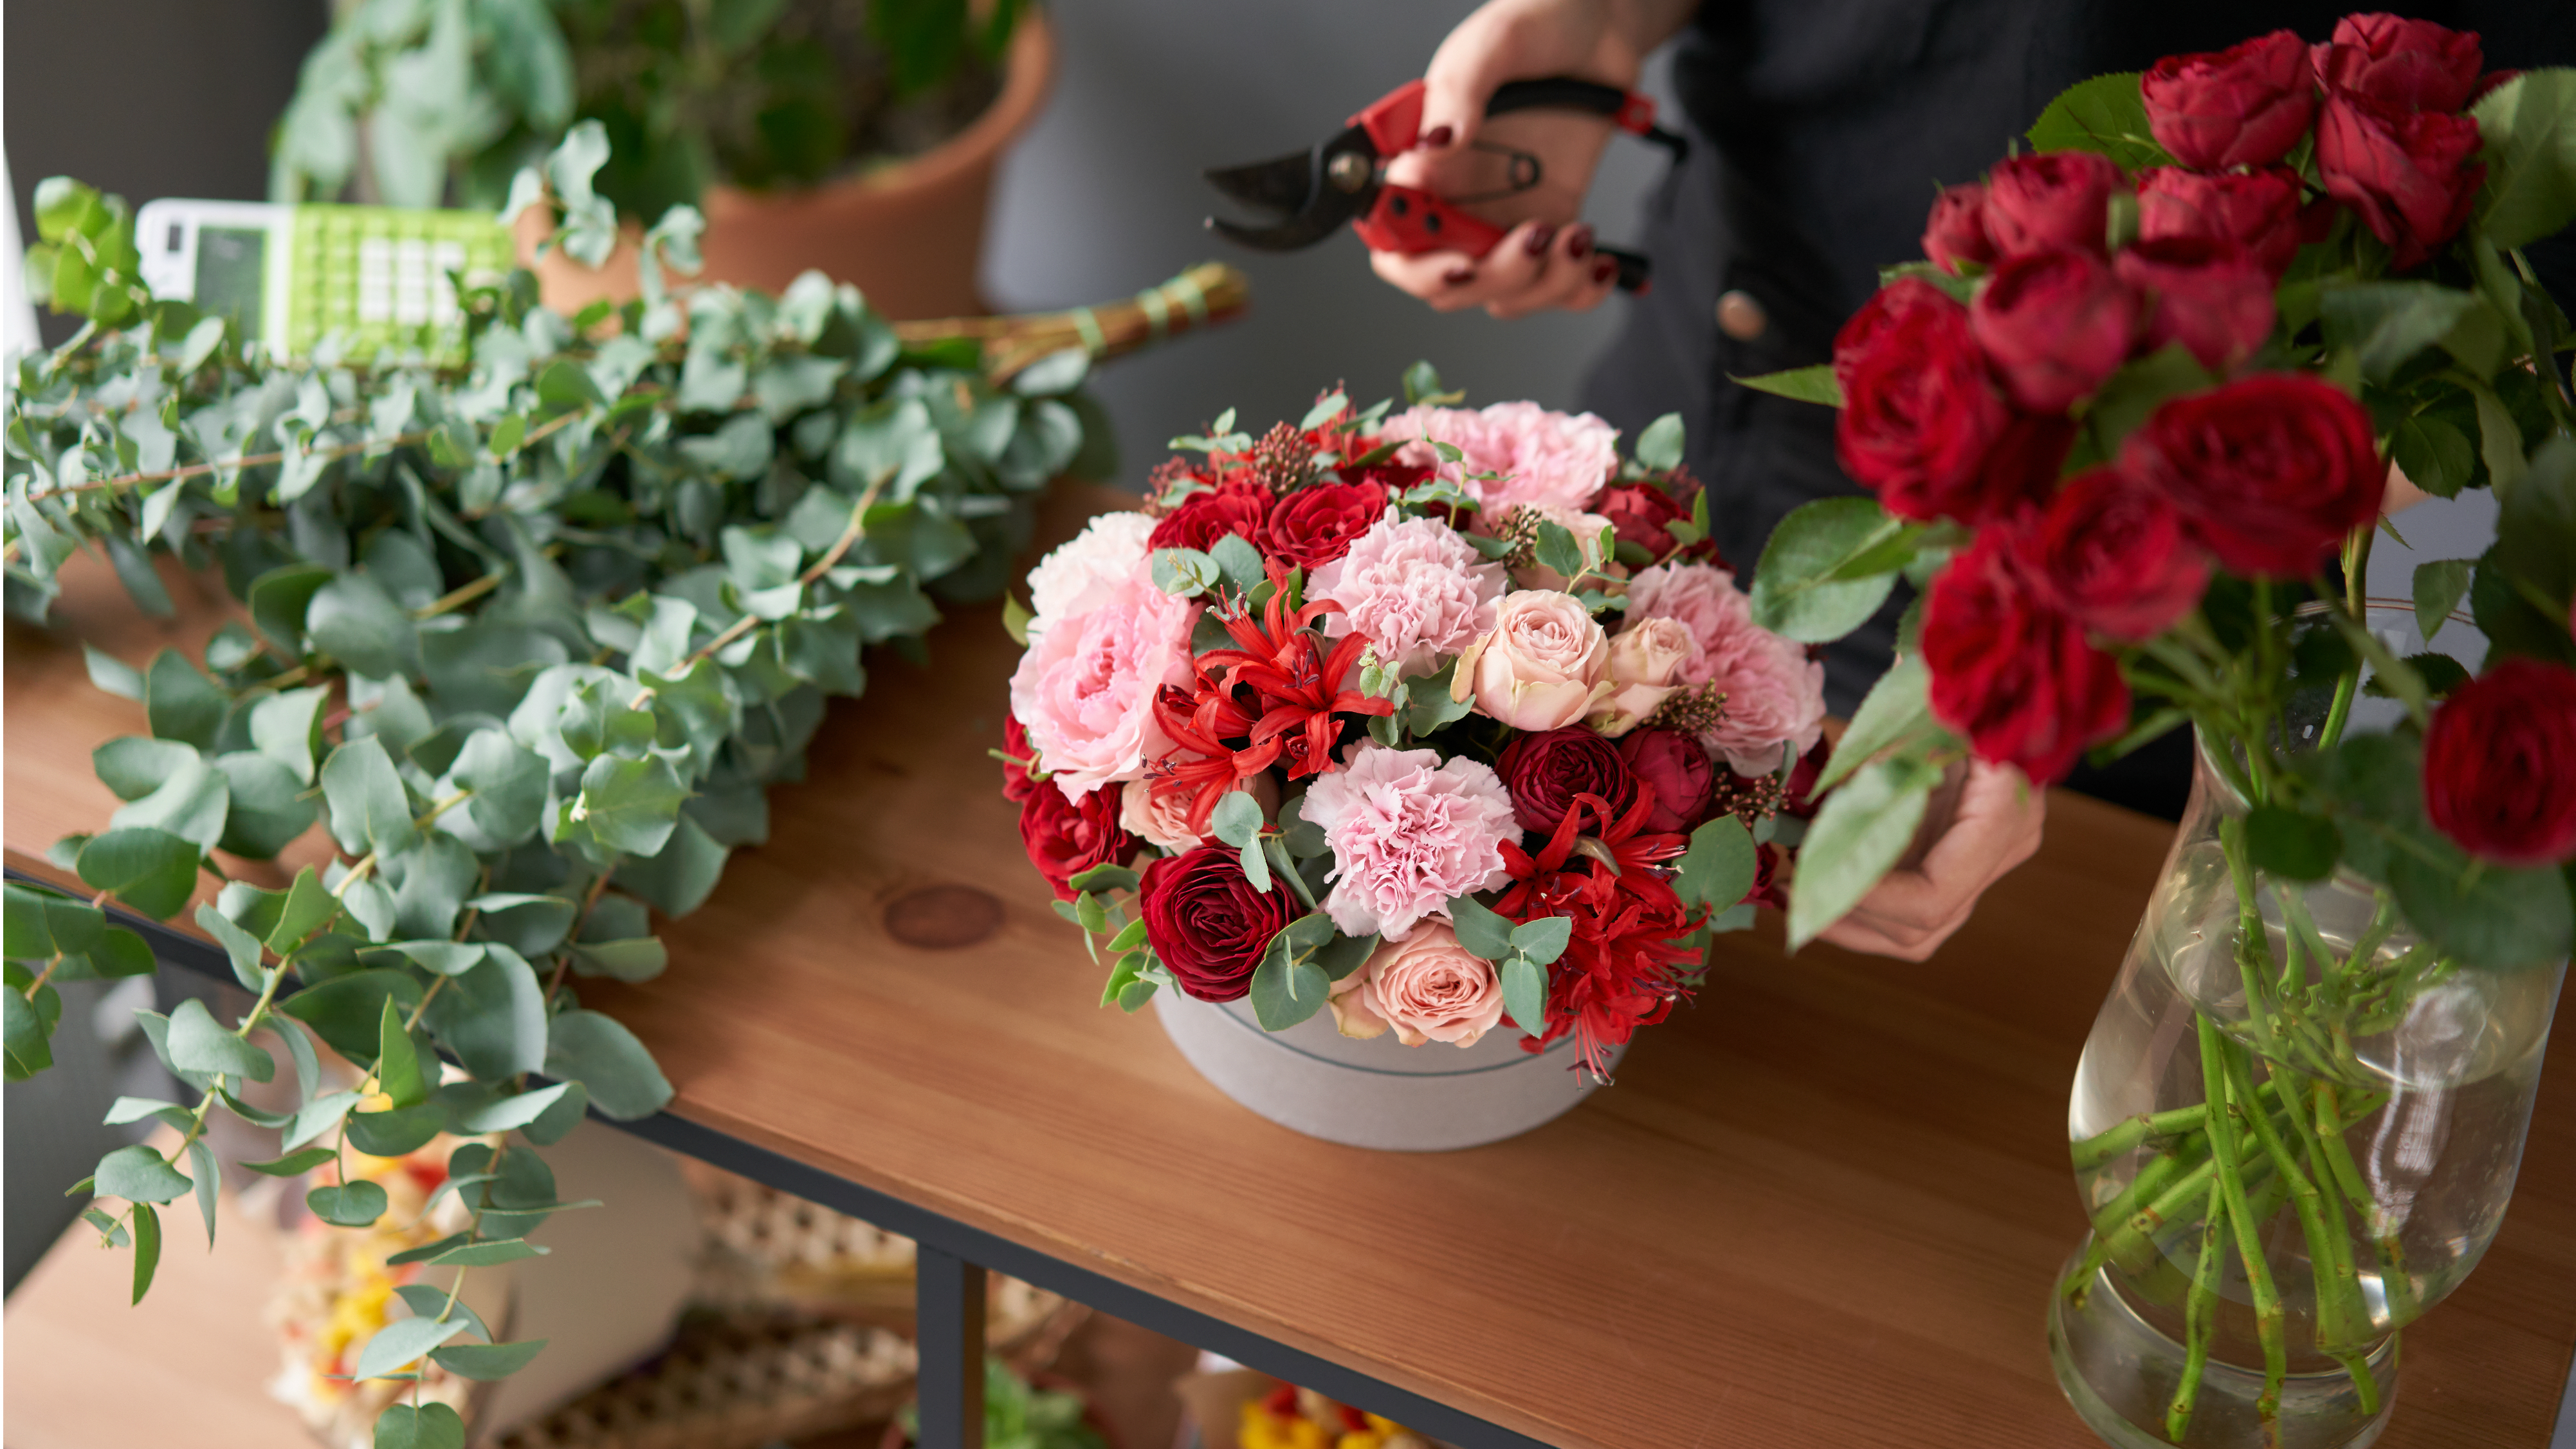 Tips to Purchasing Flowers Online